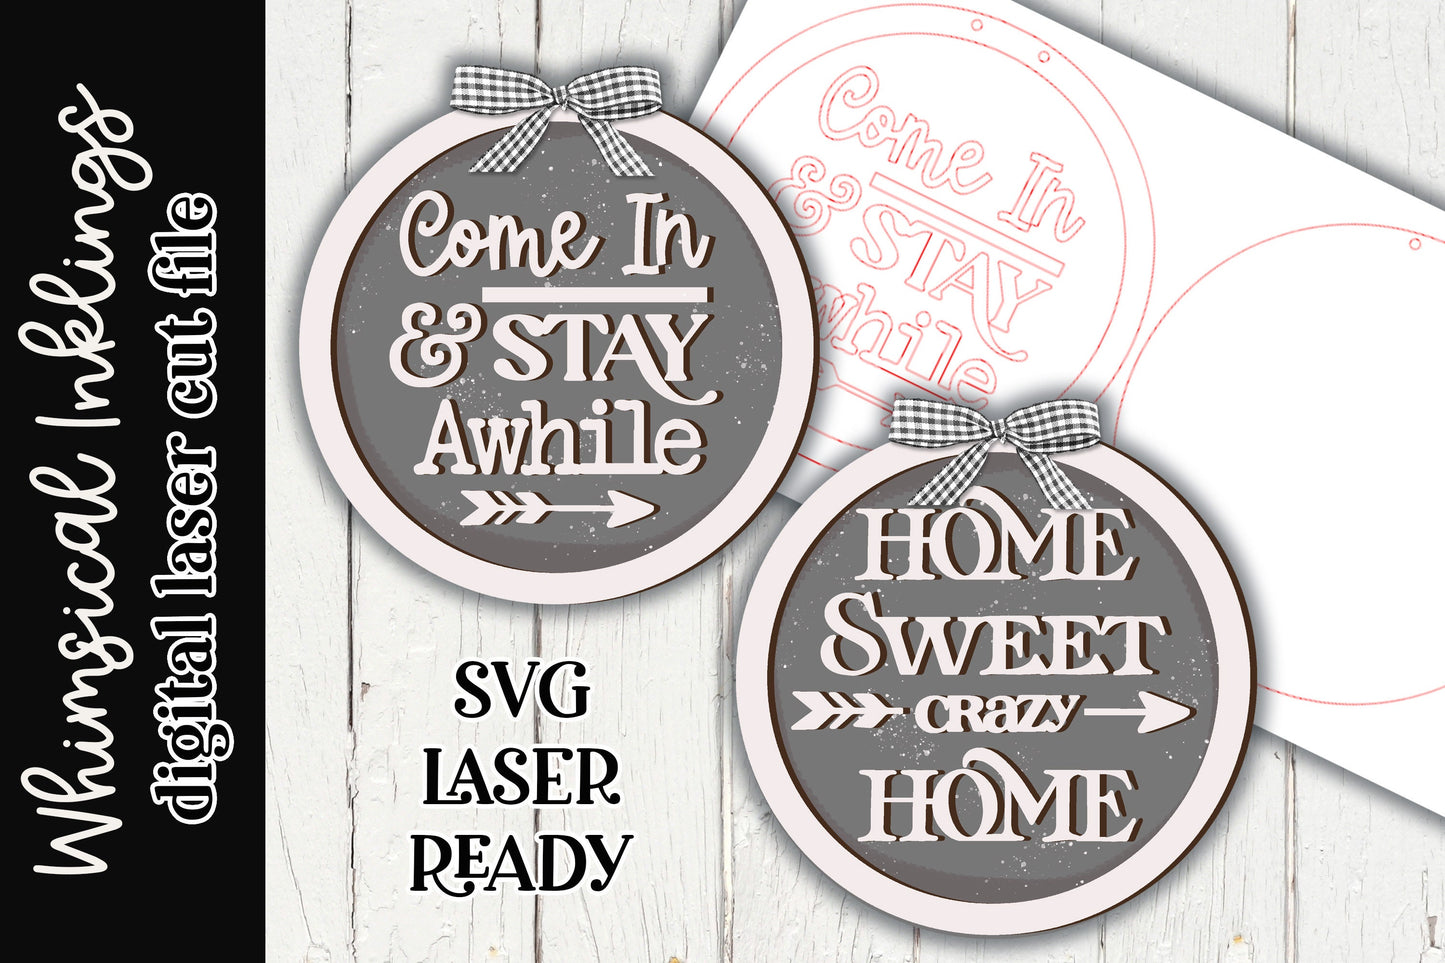 Home Sweet Crazy Home SVG| Porch Sign SVG| Laser Cut Farmhouse| Glow forge| We;come Sign SVG|